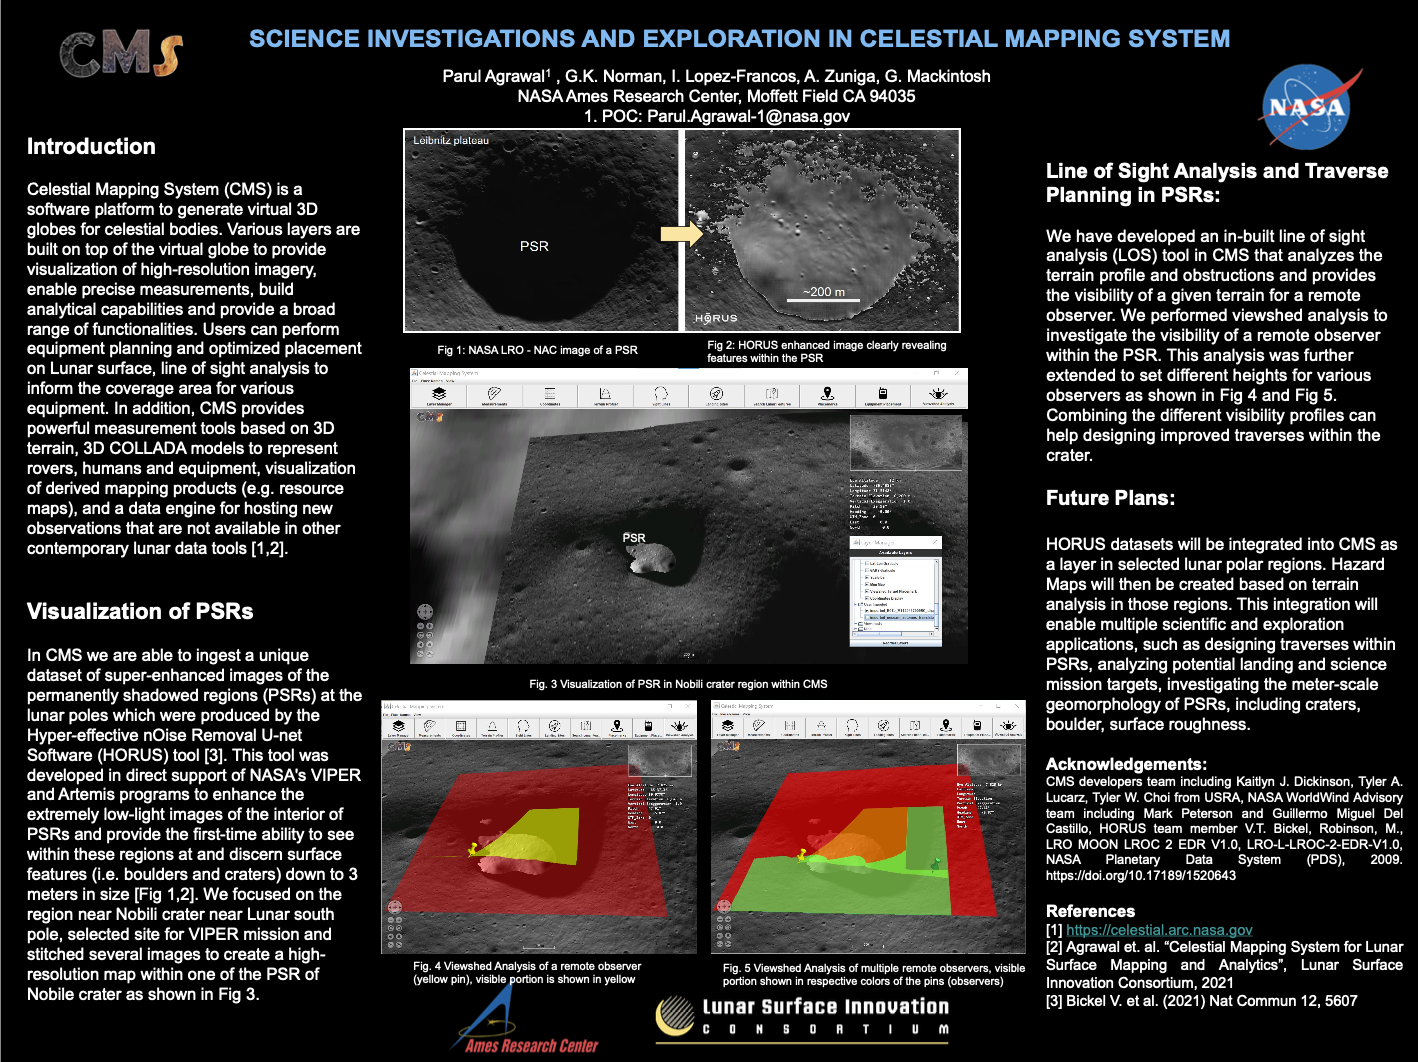 Lunar Science Investigations and Exploration in Celestial Mapping System Poster